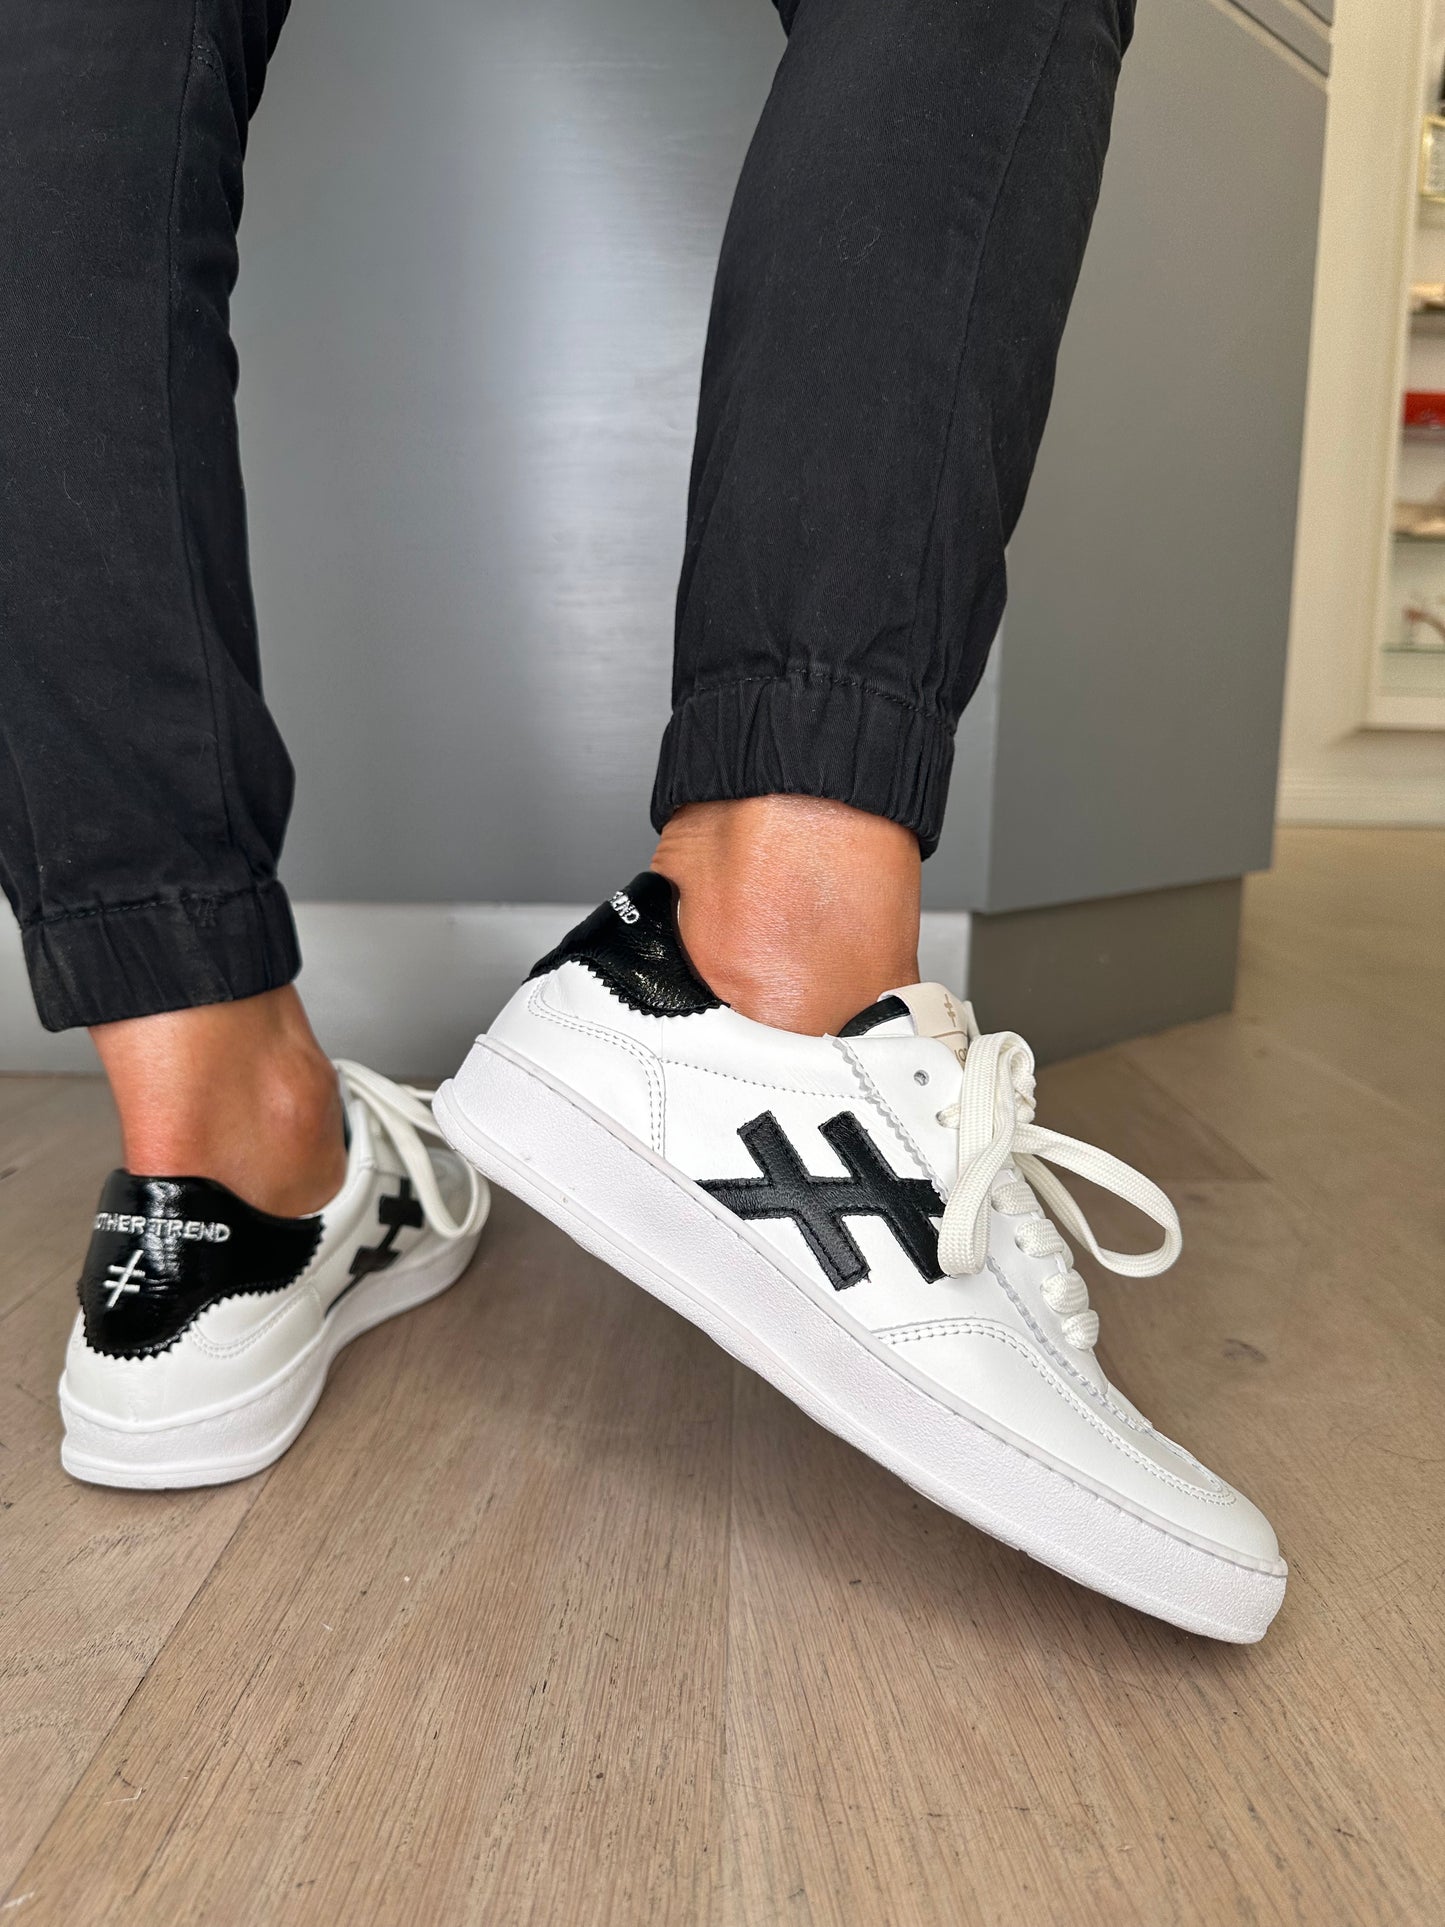 Alpe (Another Trend) - White/Black Trim Trainer